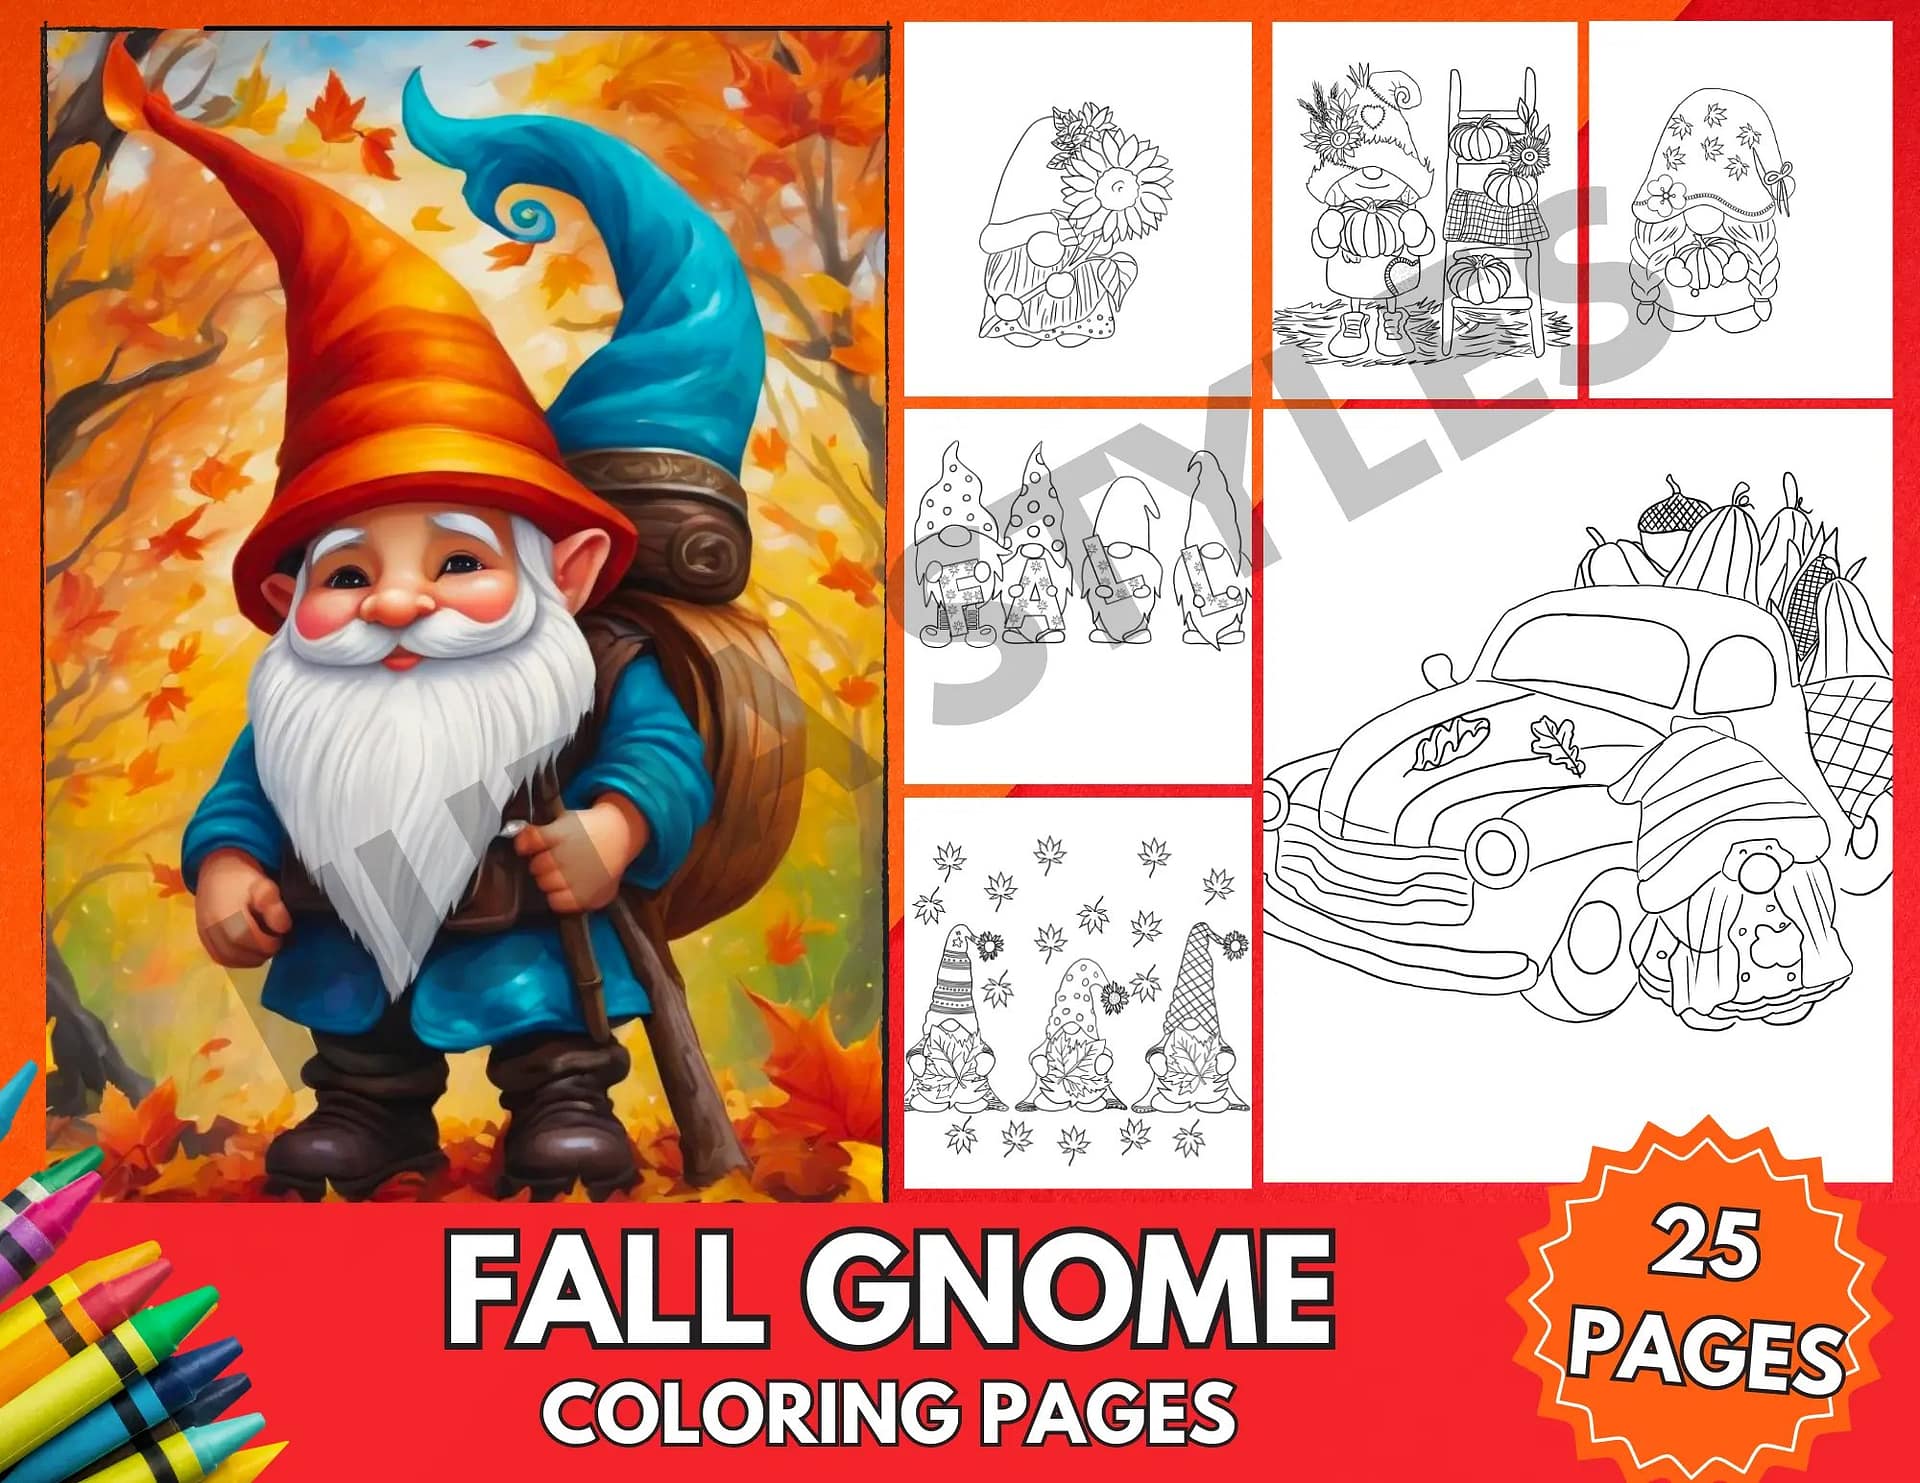 Fall Gnome coloring page